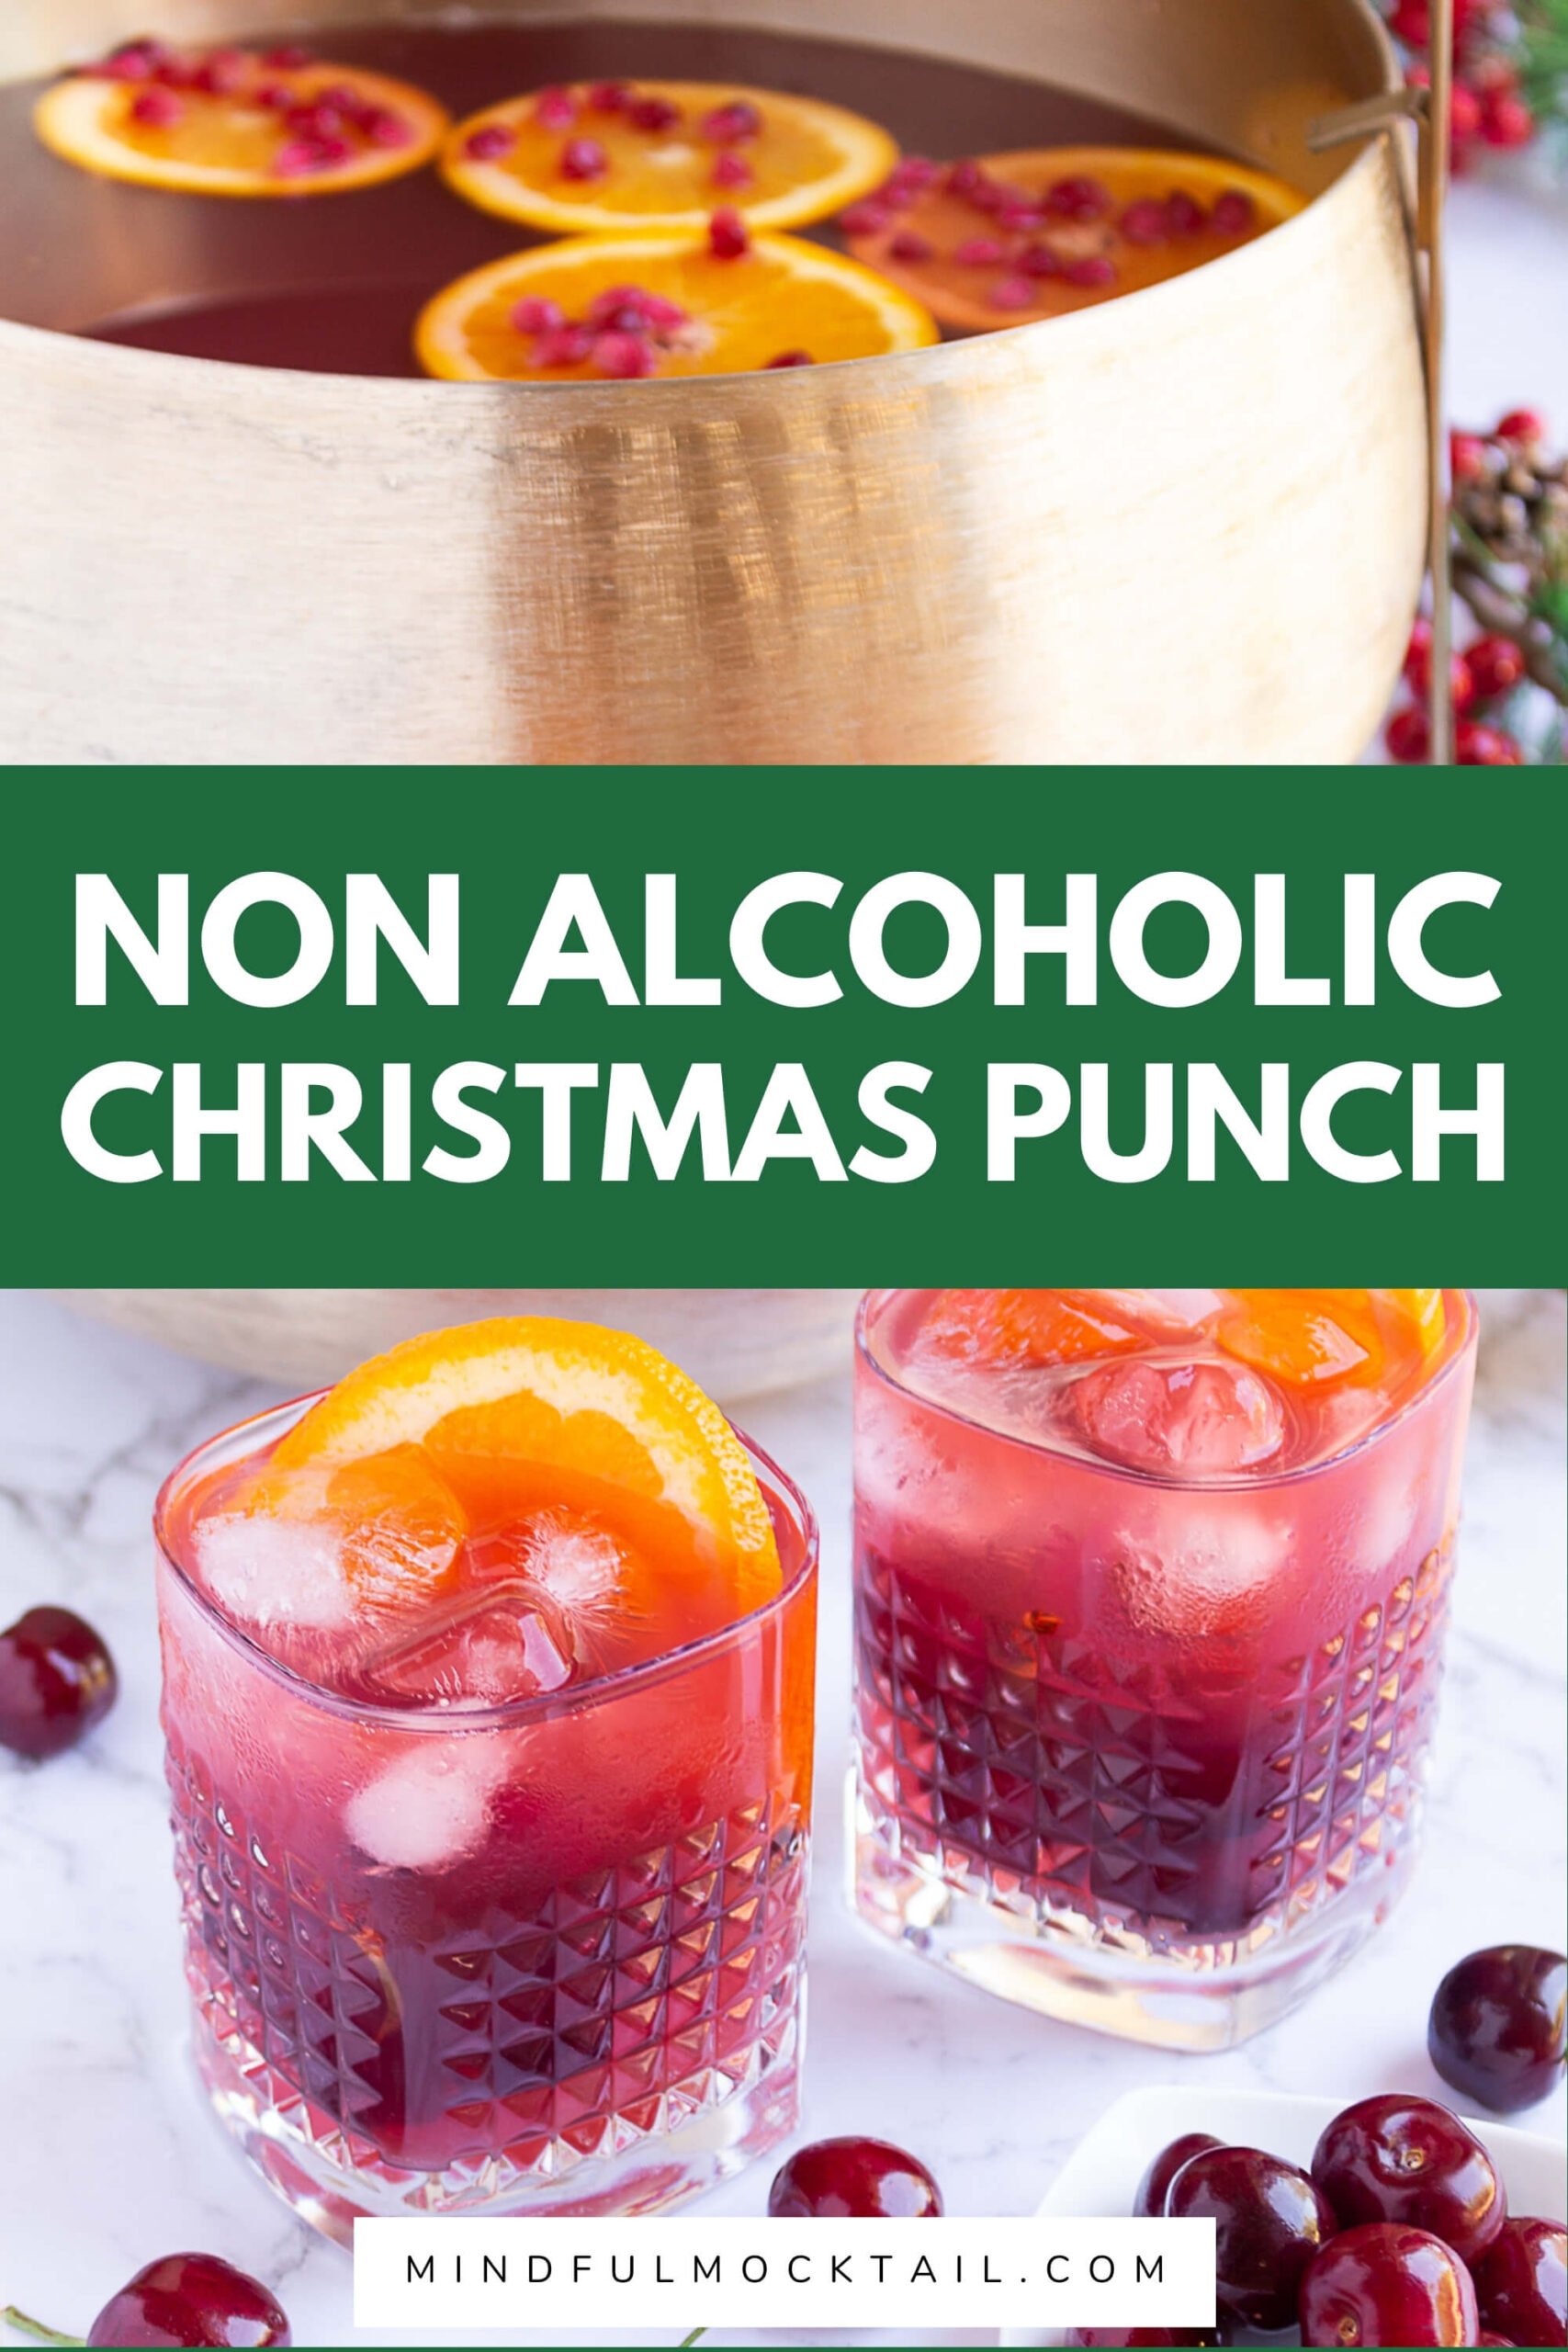 Non Alcoholic Christmas Punch For The Holidays - The Mindful Mocktail